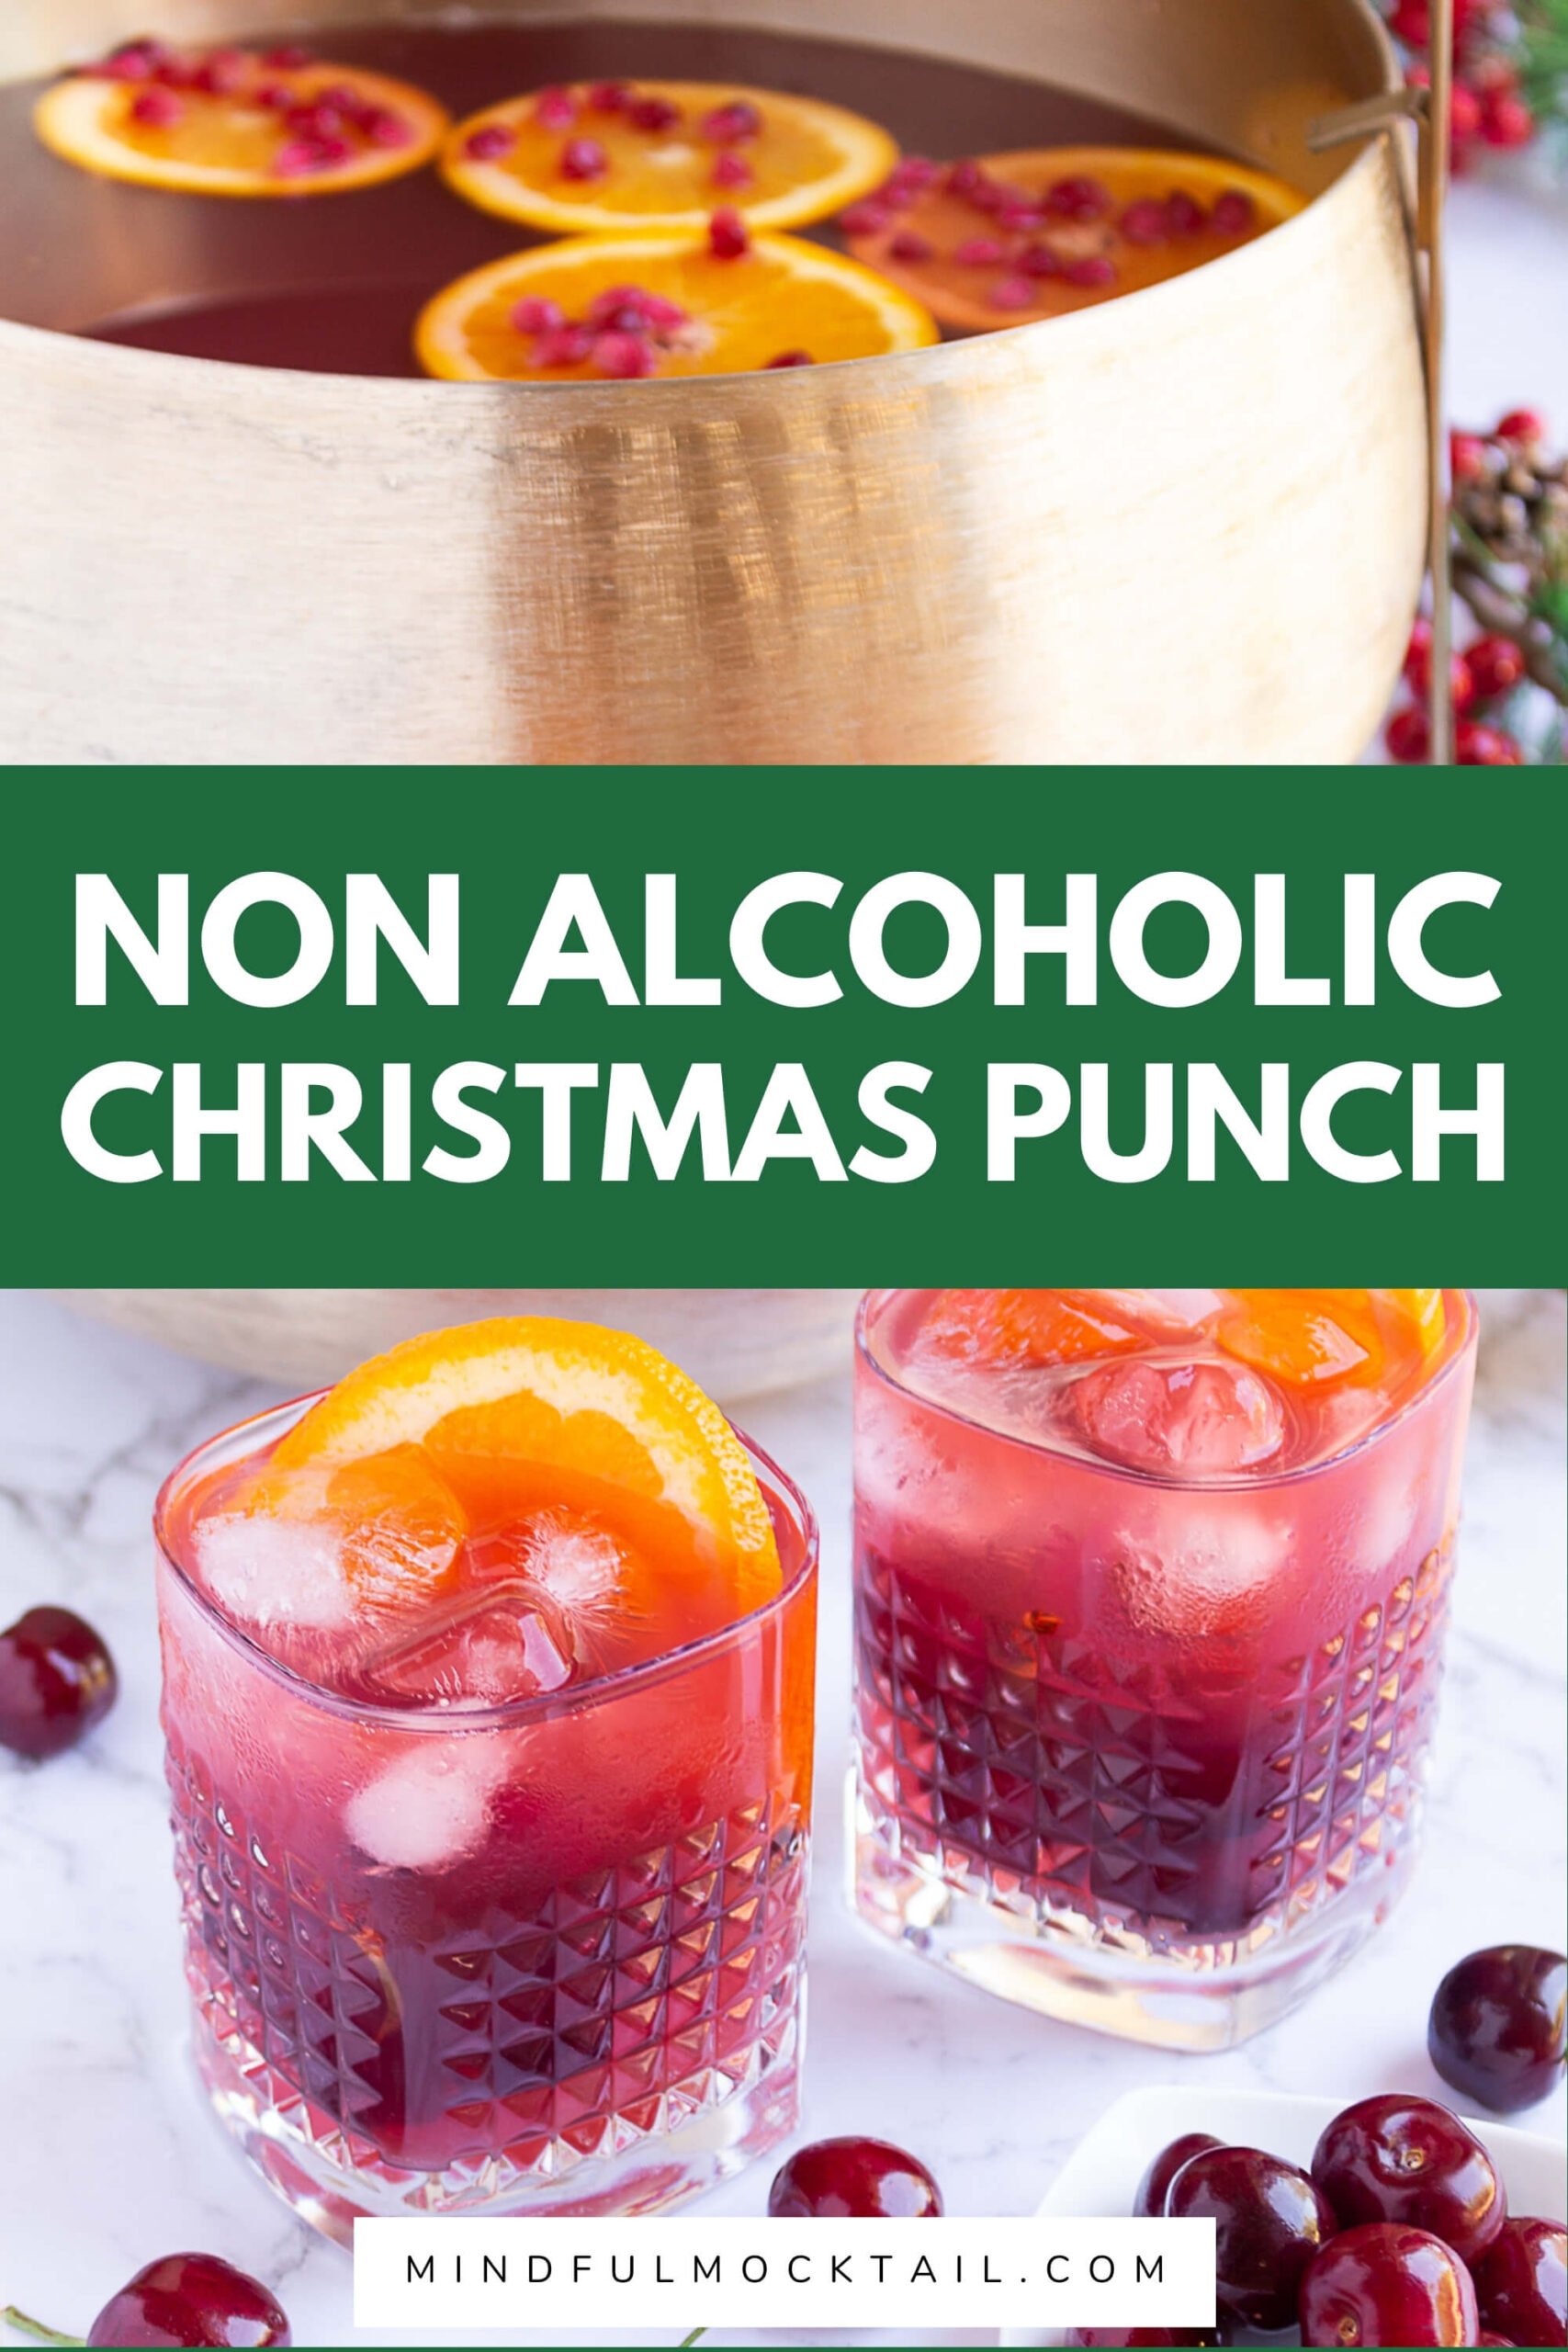 Non Alcoholic Christmas Punch For The Holidays - The Mindful Mocktail